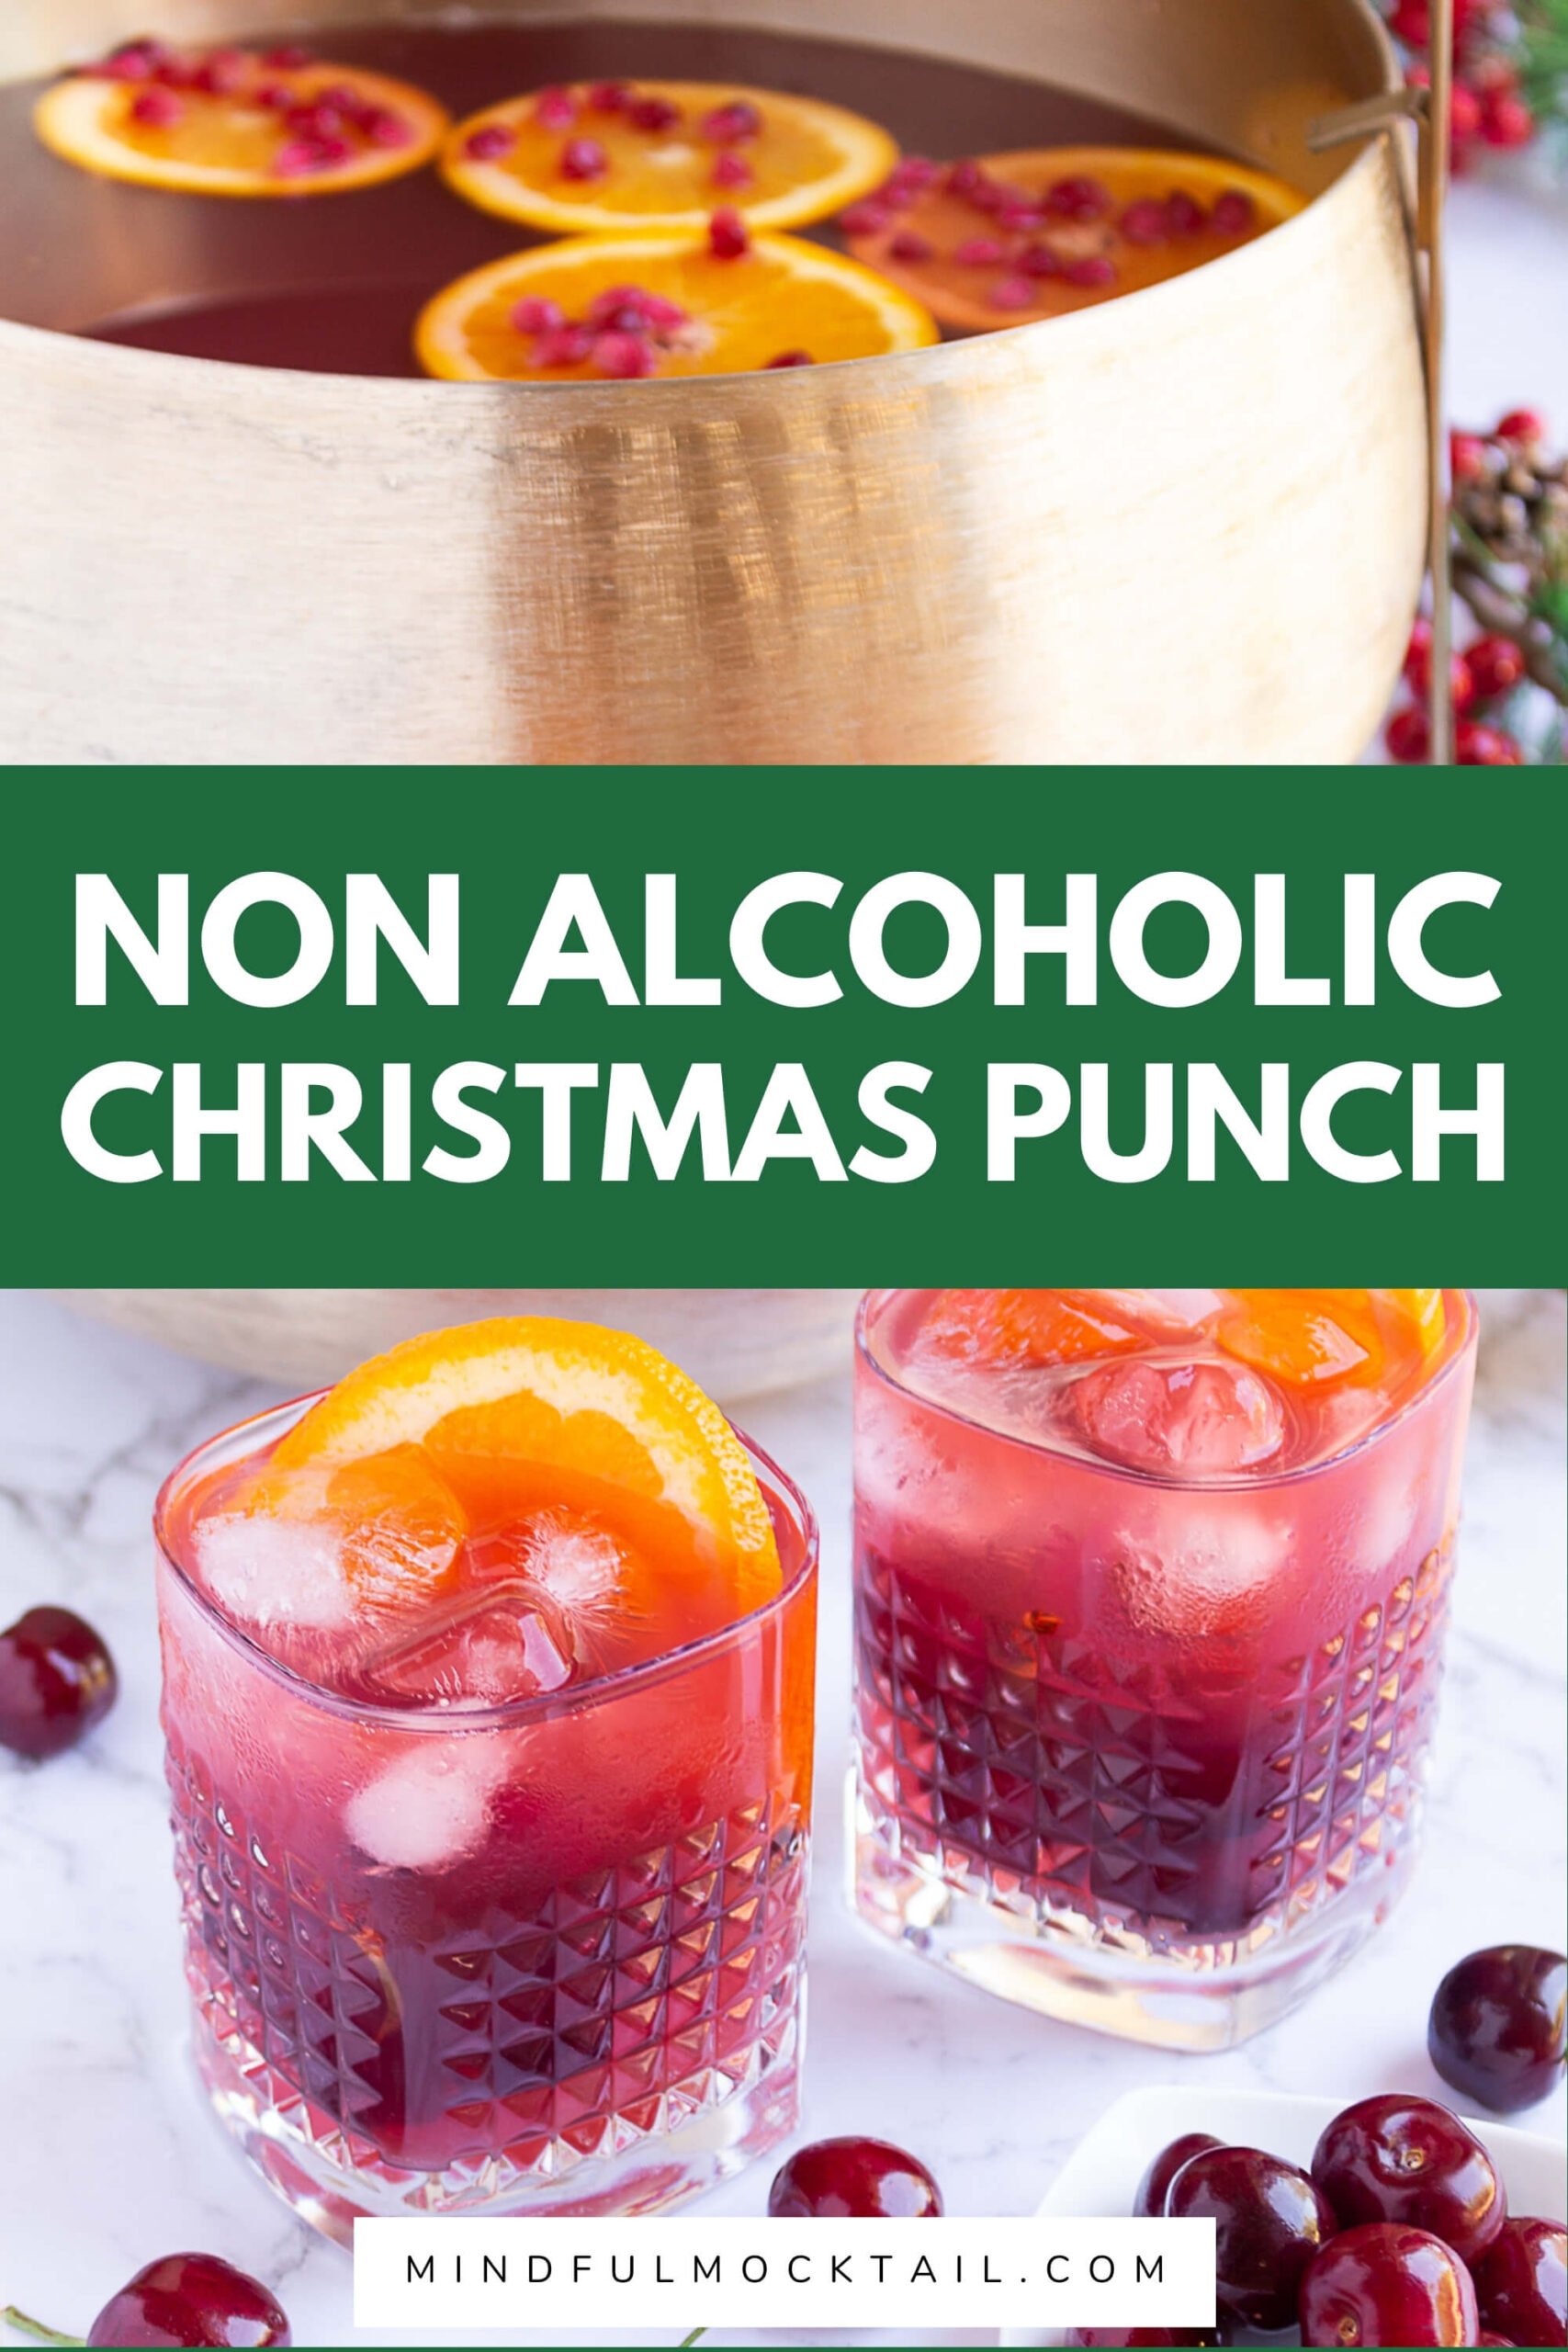 Non Alcoholic Christmas Punch For The Holidays - The Mindful Mocktail